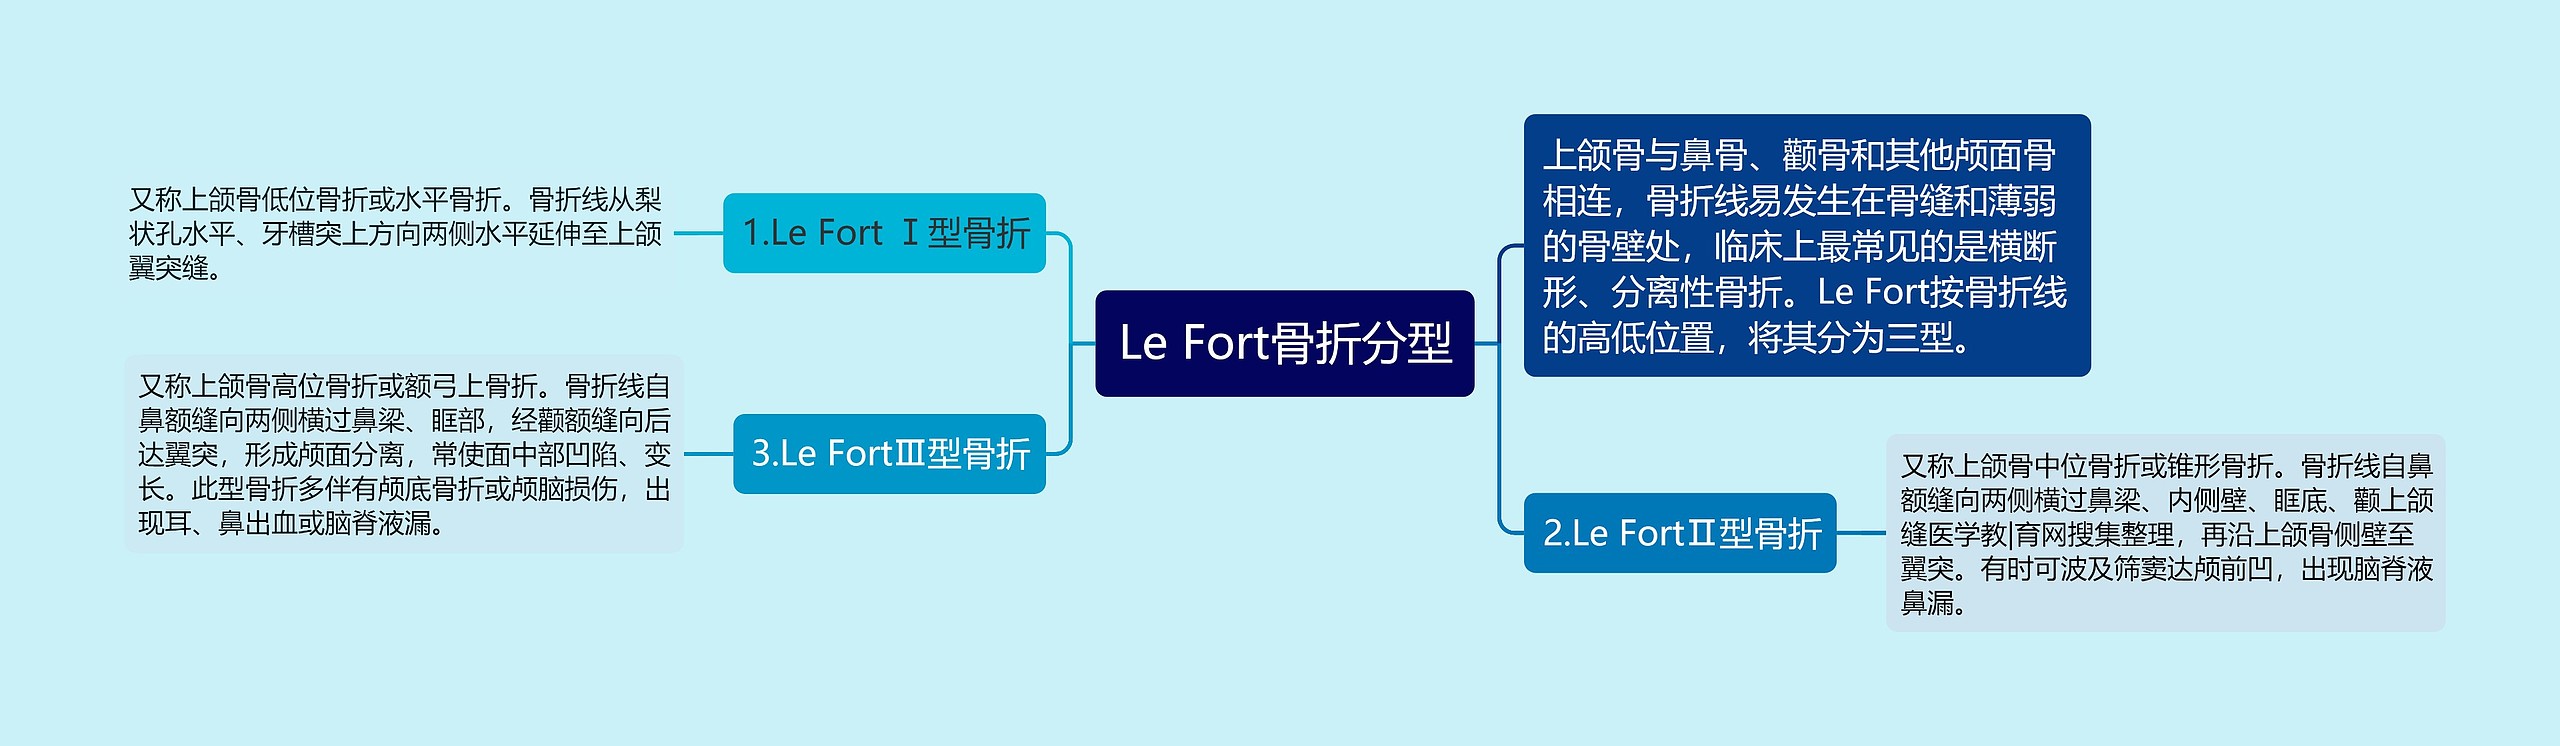 Le Fort骨折分型